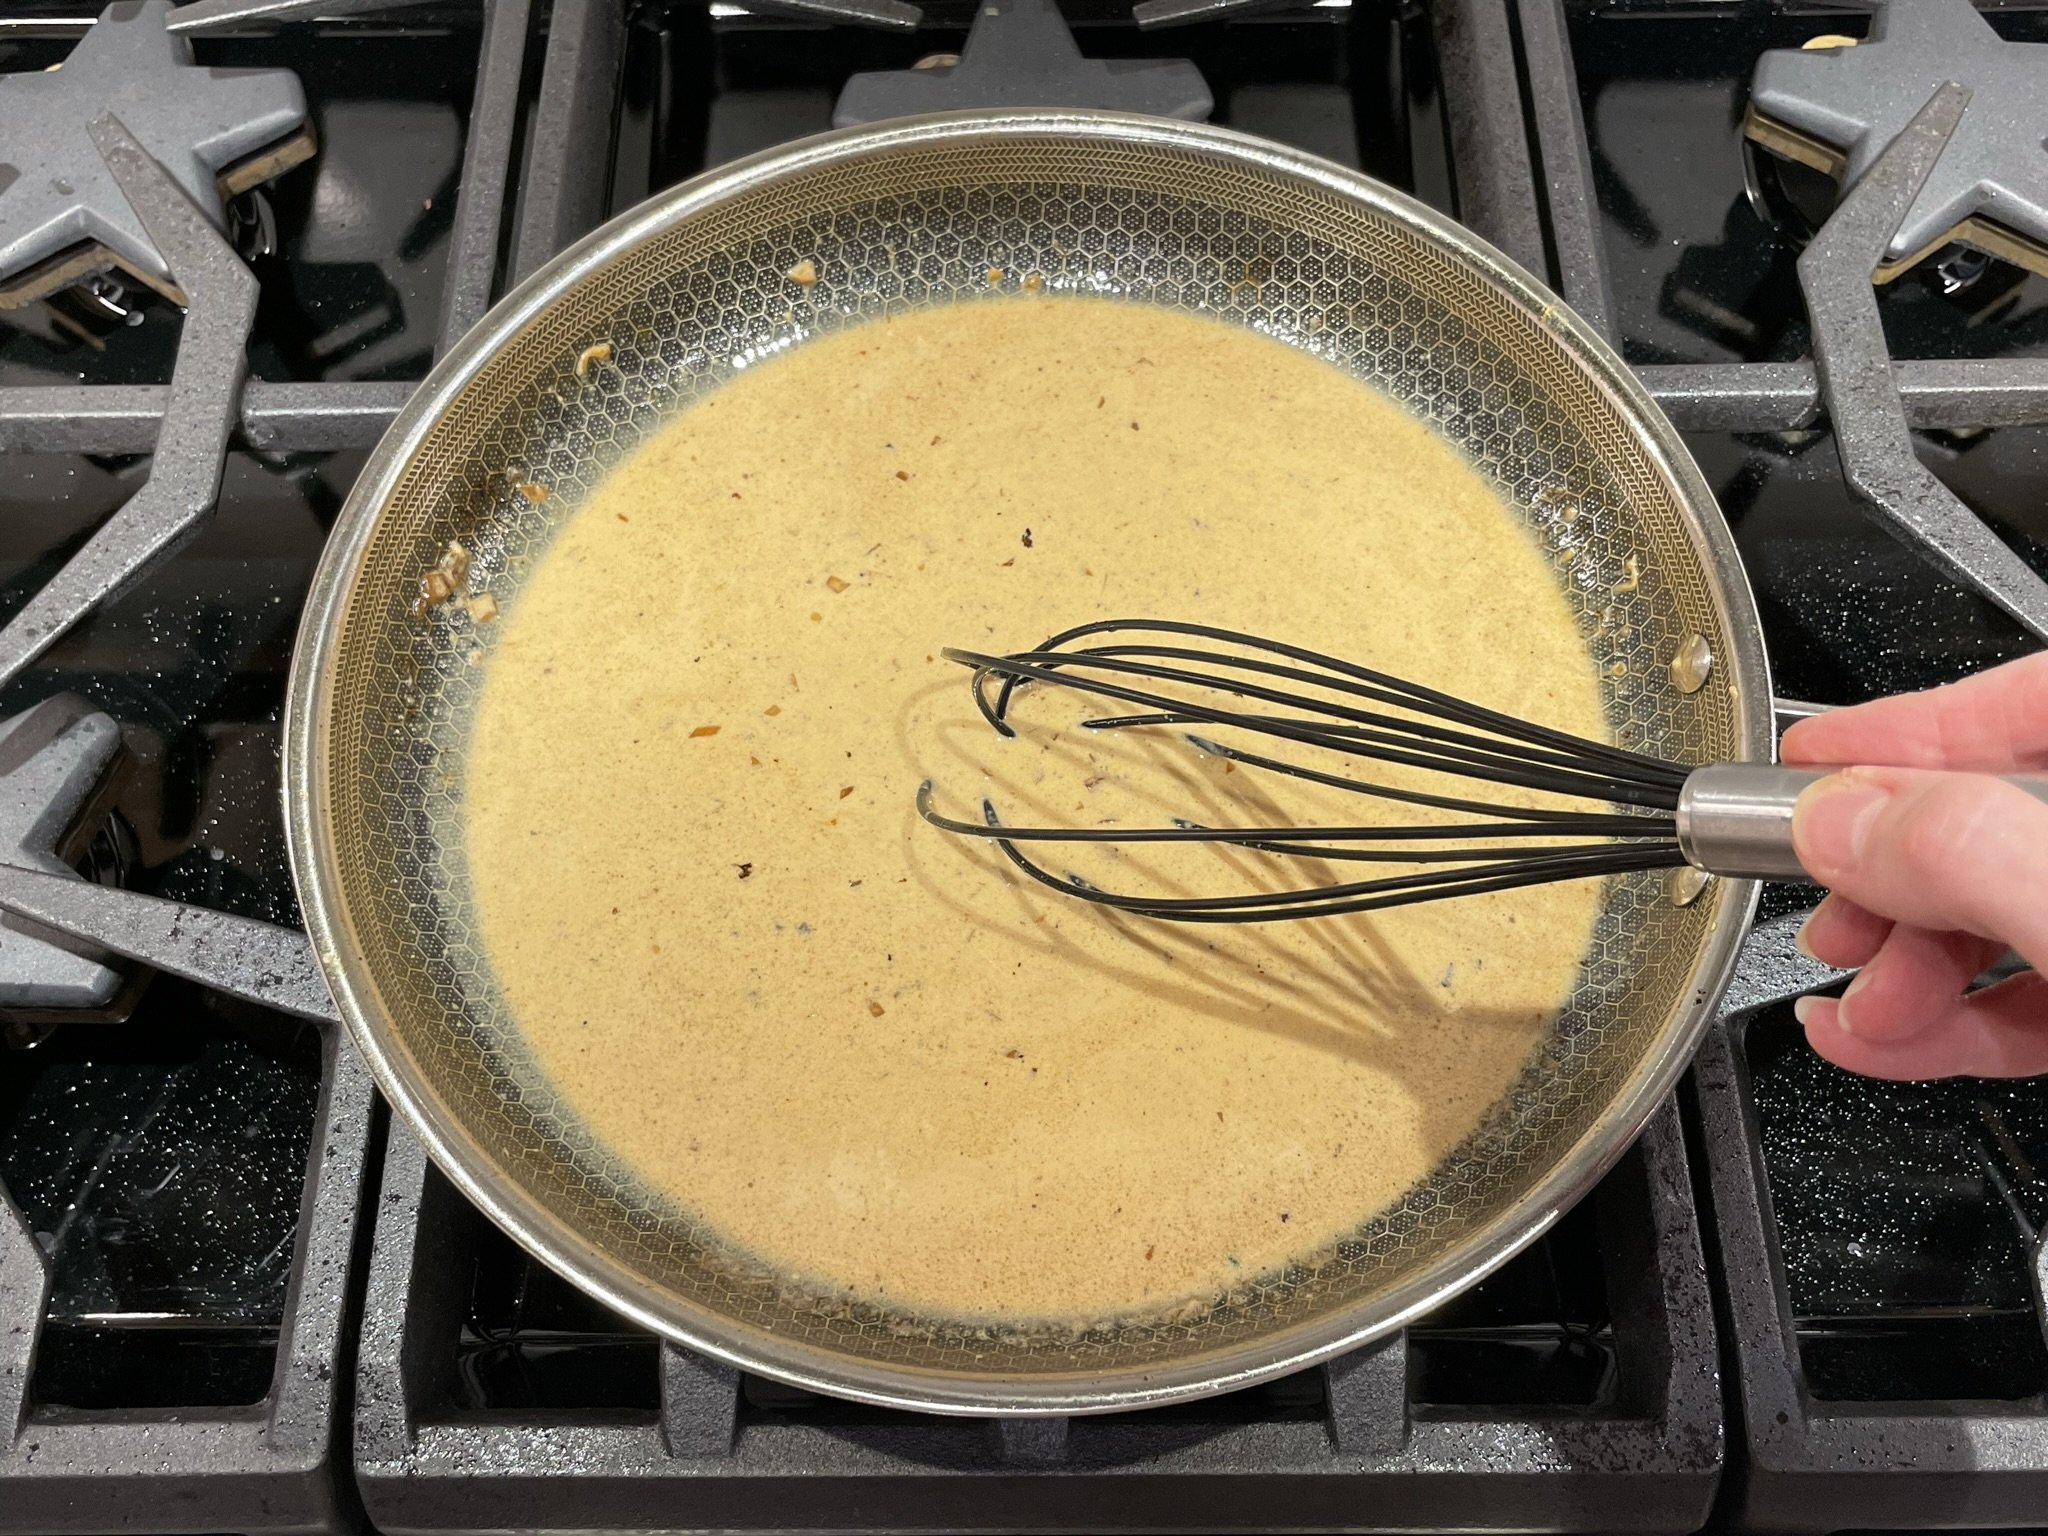 Whisk until thickened.